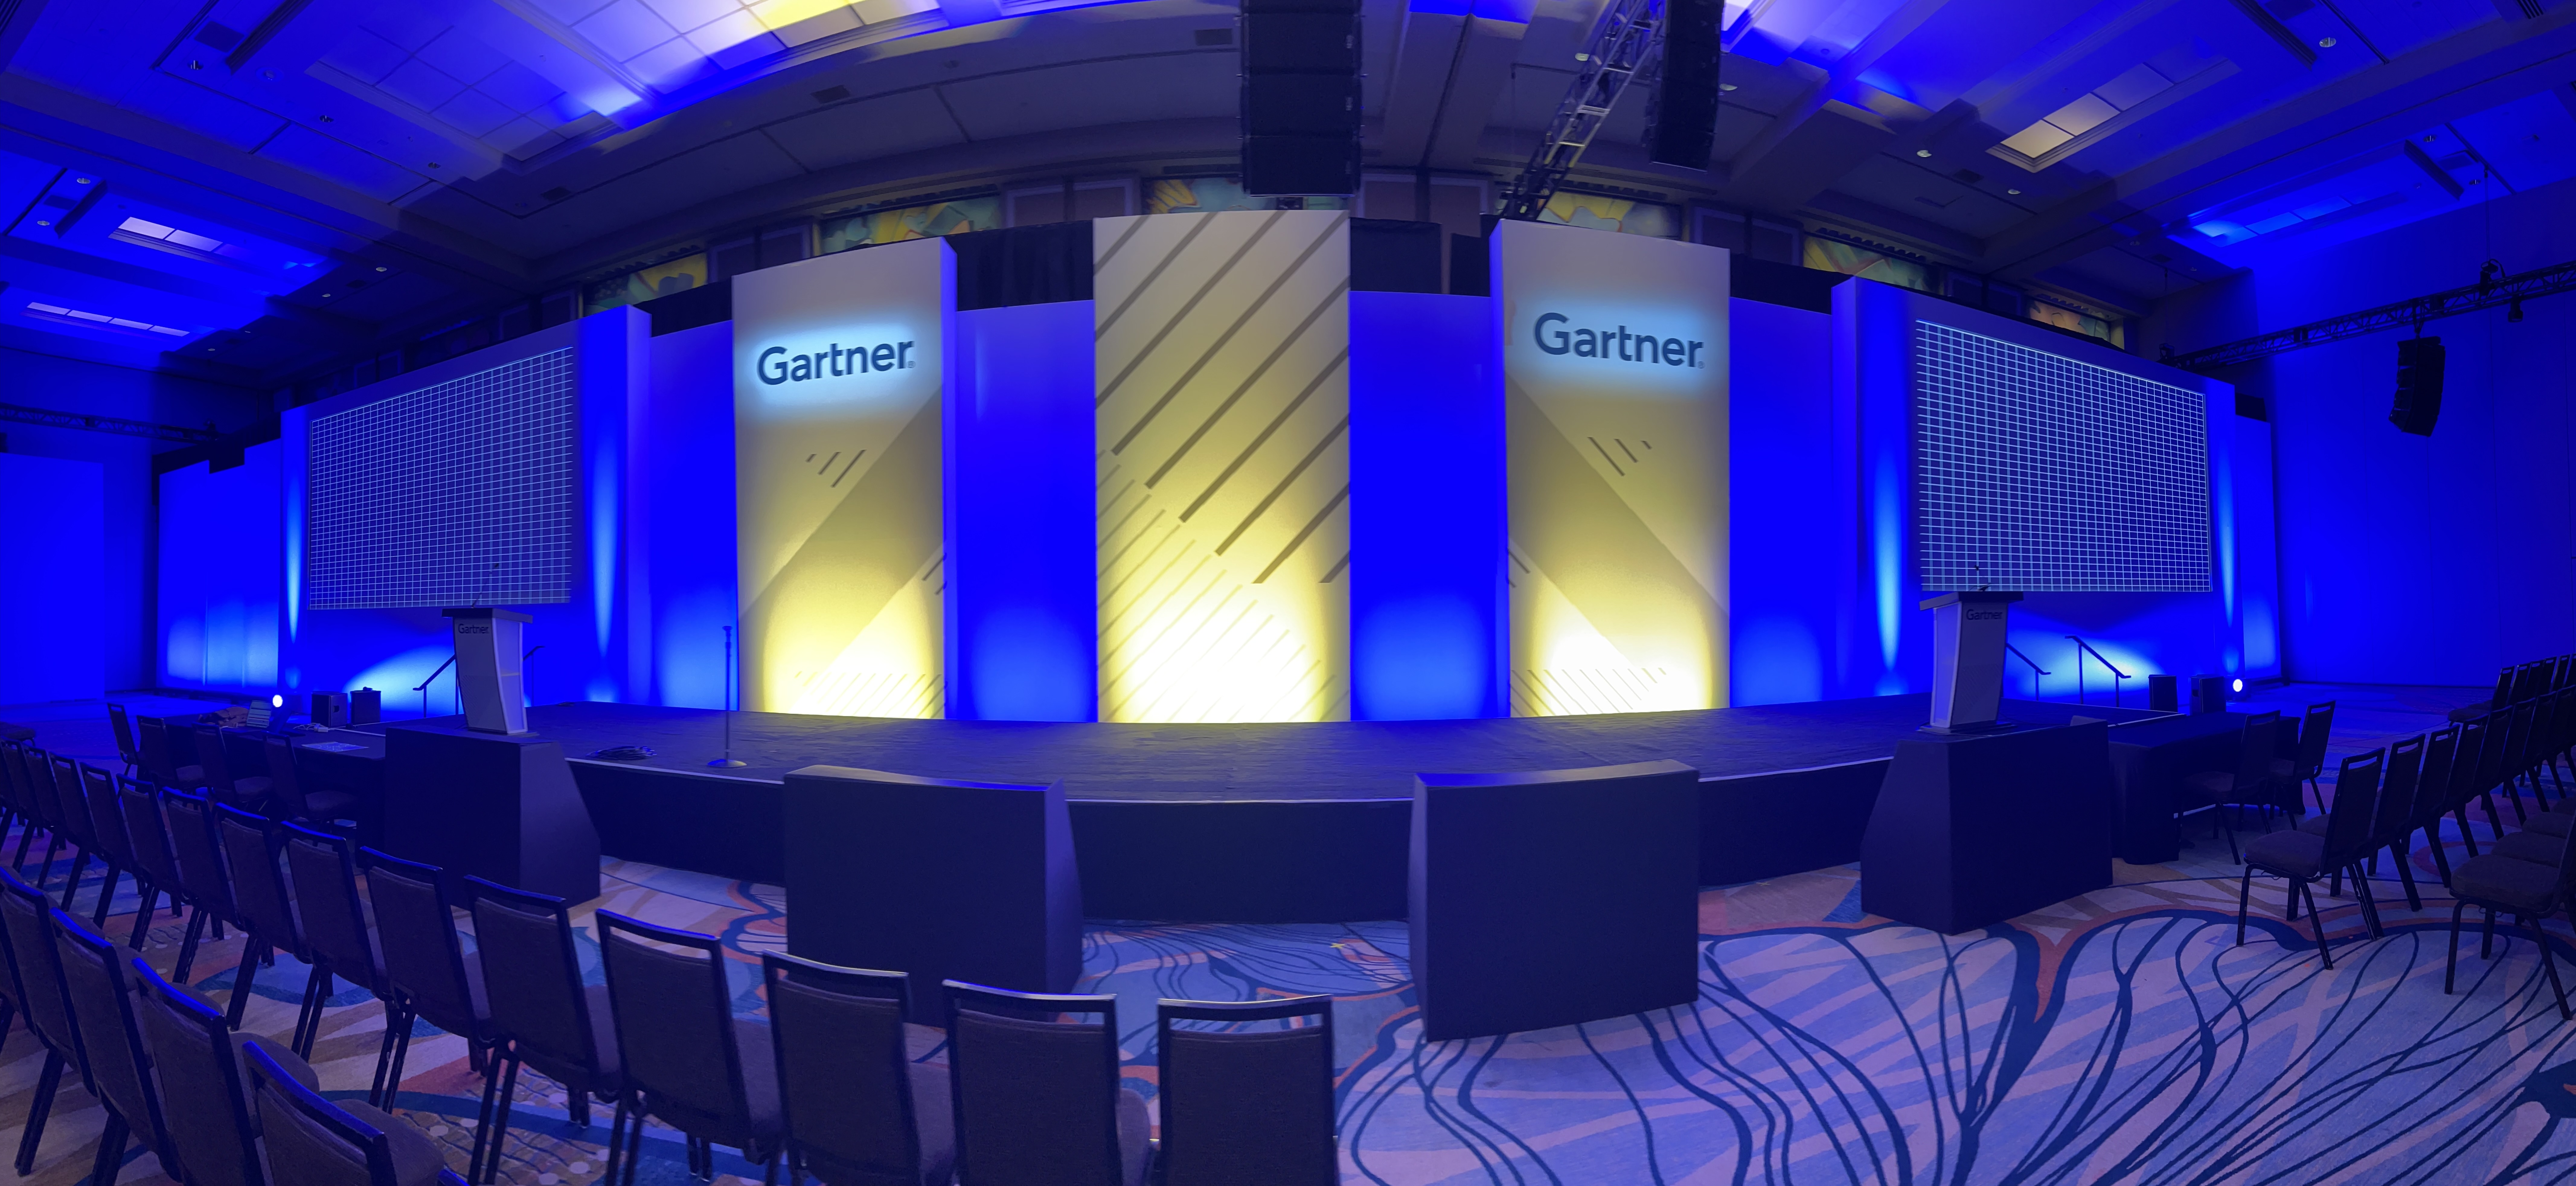 A wide view of an empty conference room with "Gartner" projected on big screens.